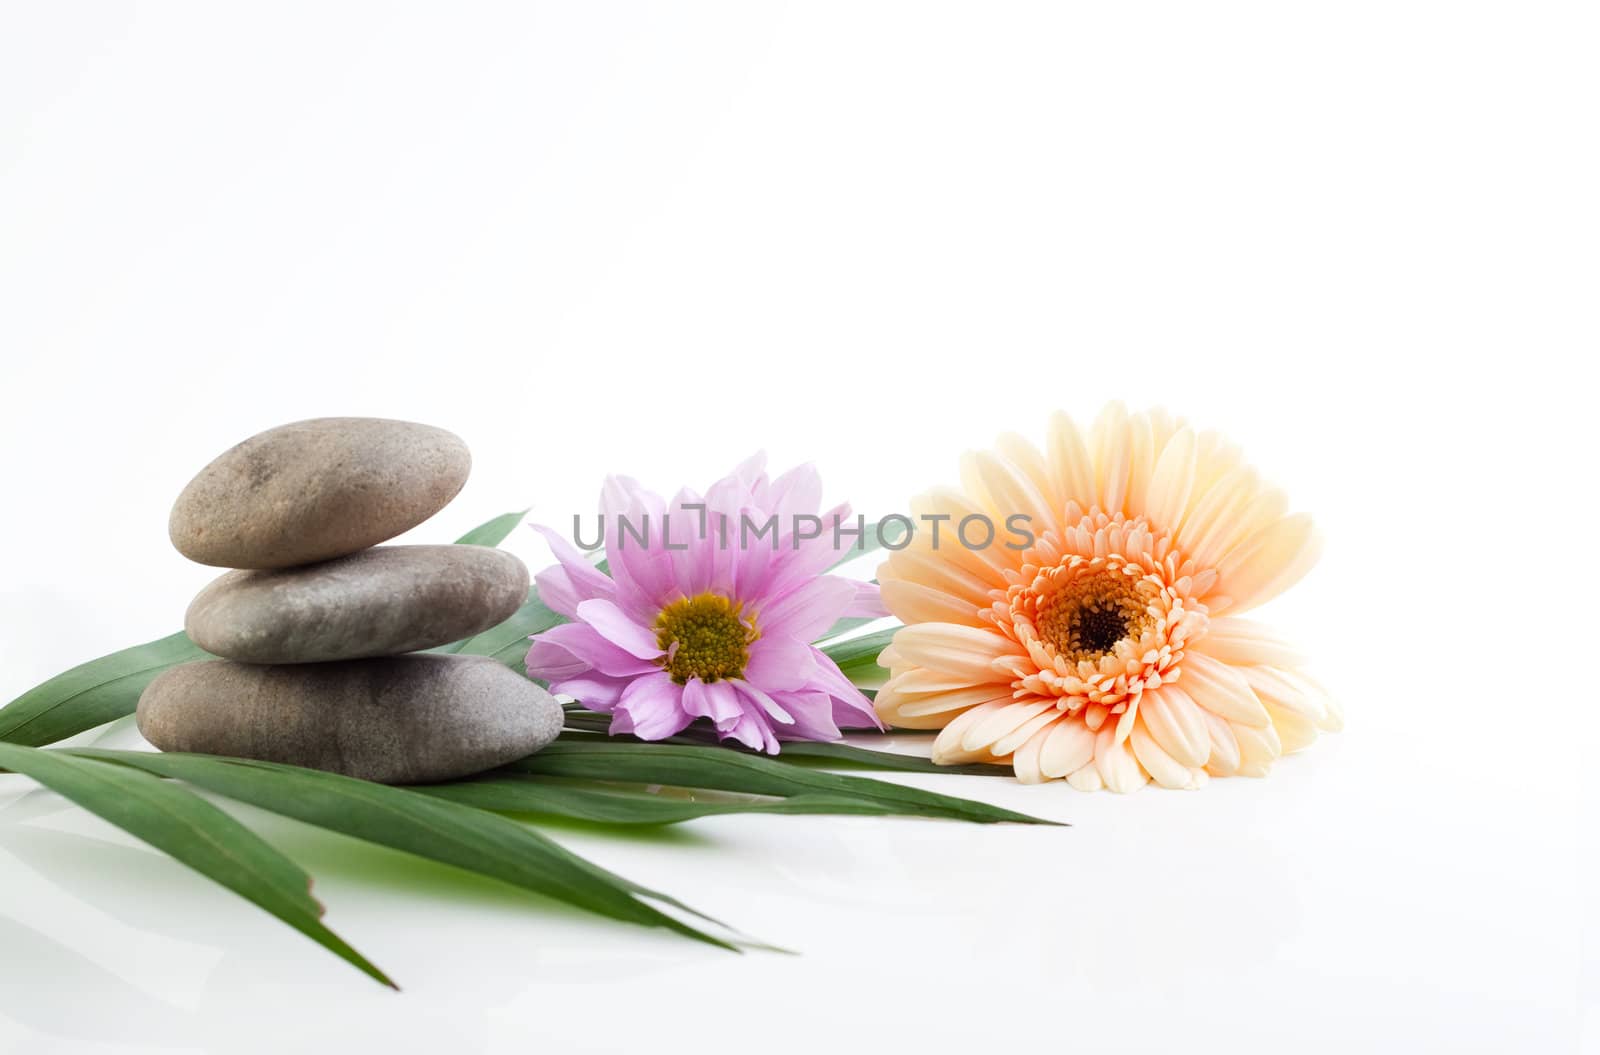 A spa theme still life with river stones and flowers, isolated on white with reflections